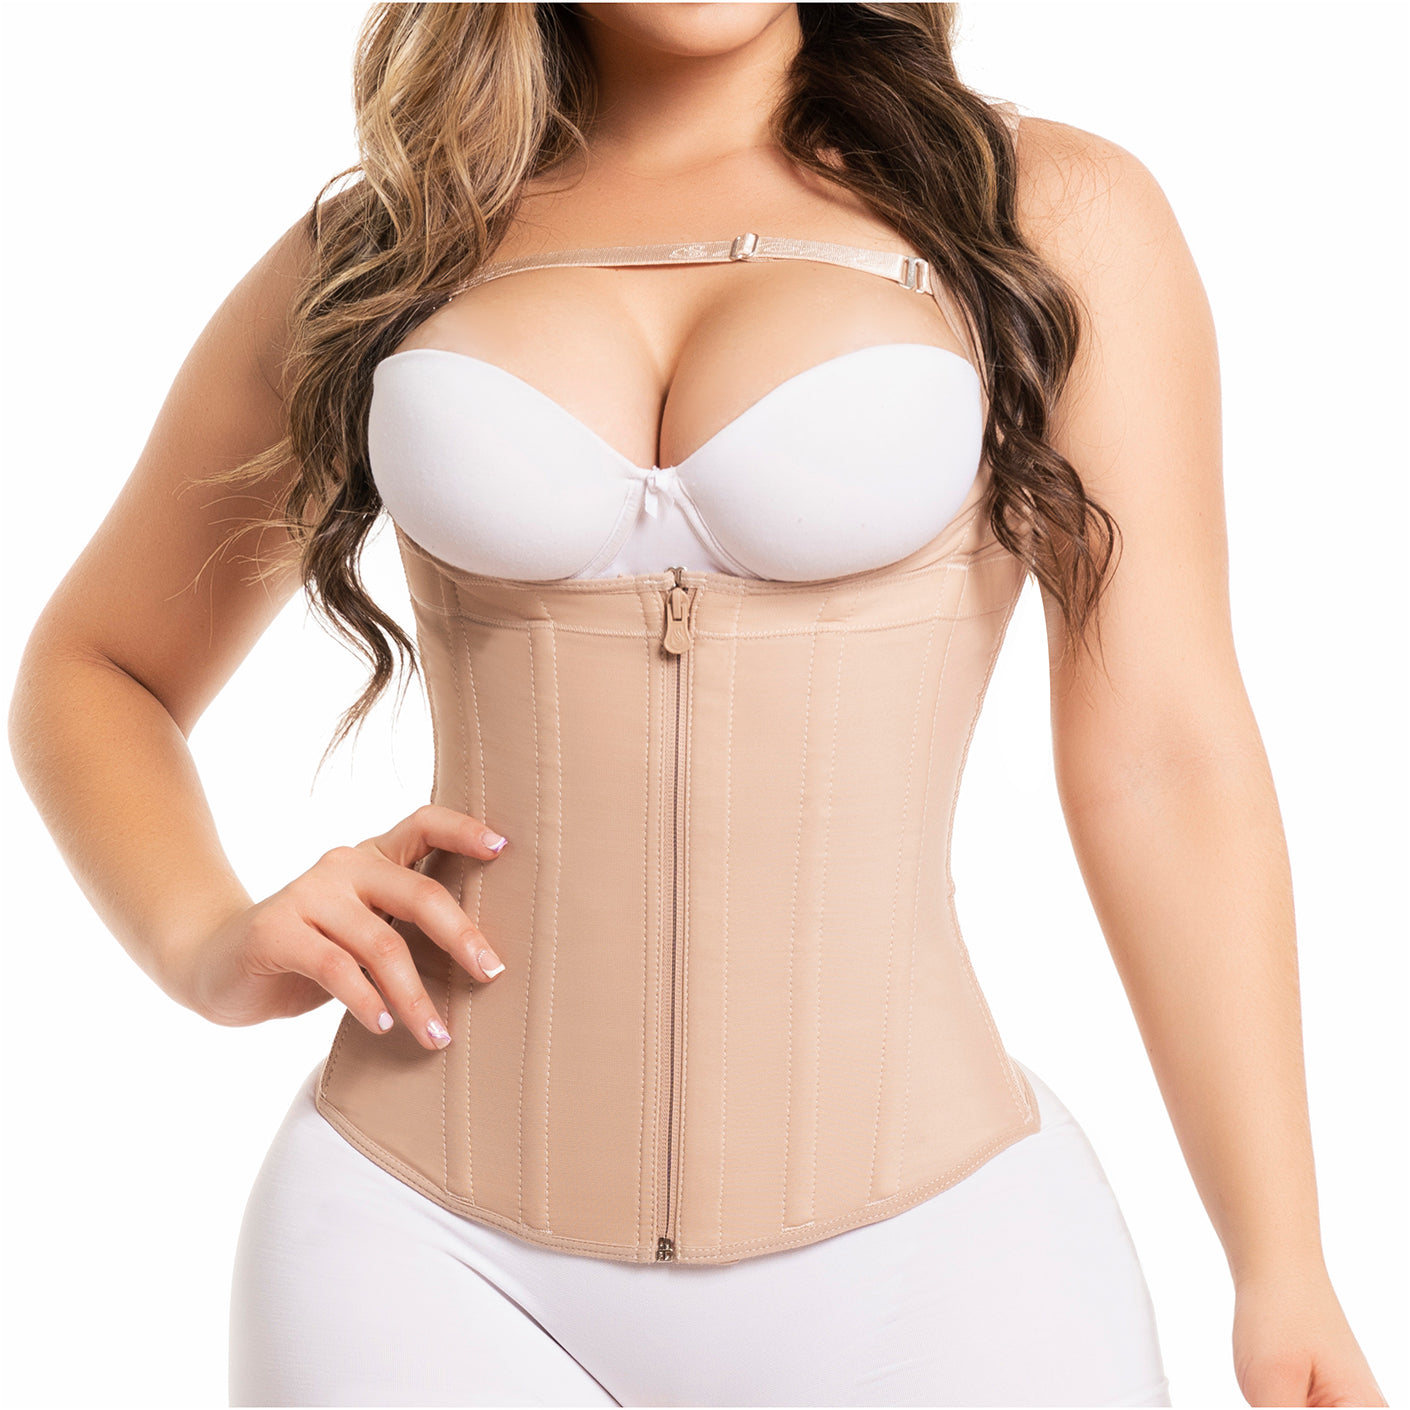 POST SURGICAL BODY SHAPER FAJAS COLOMBIANAS REDUCTORAS MOLDEATE SALOME 0215